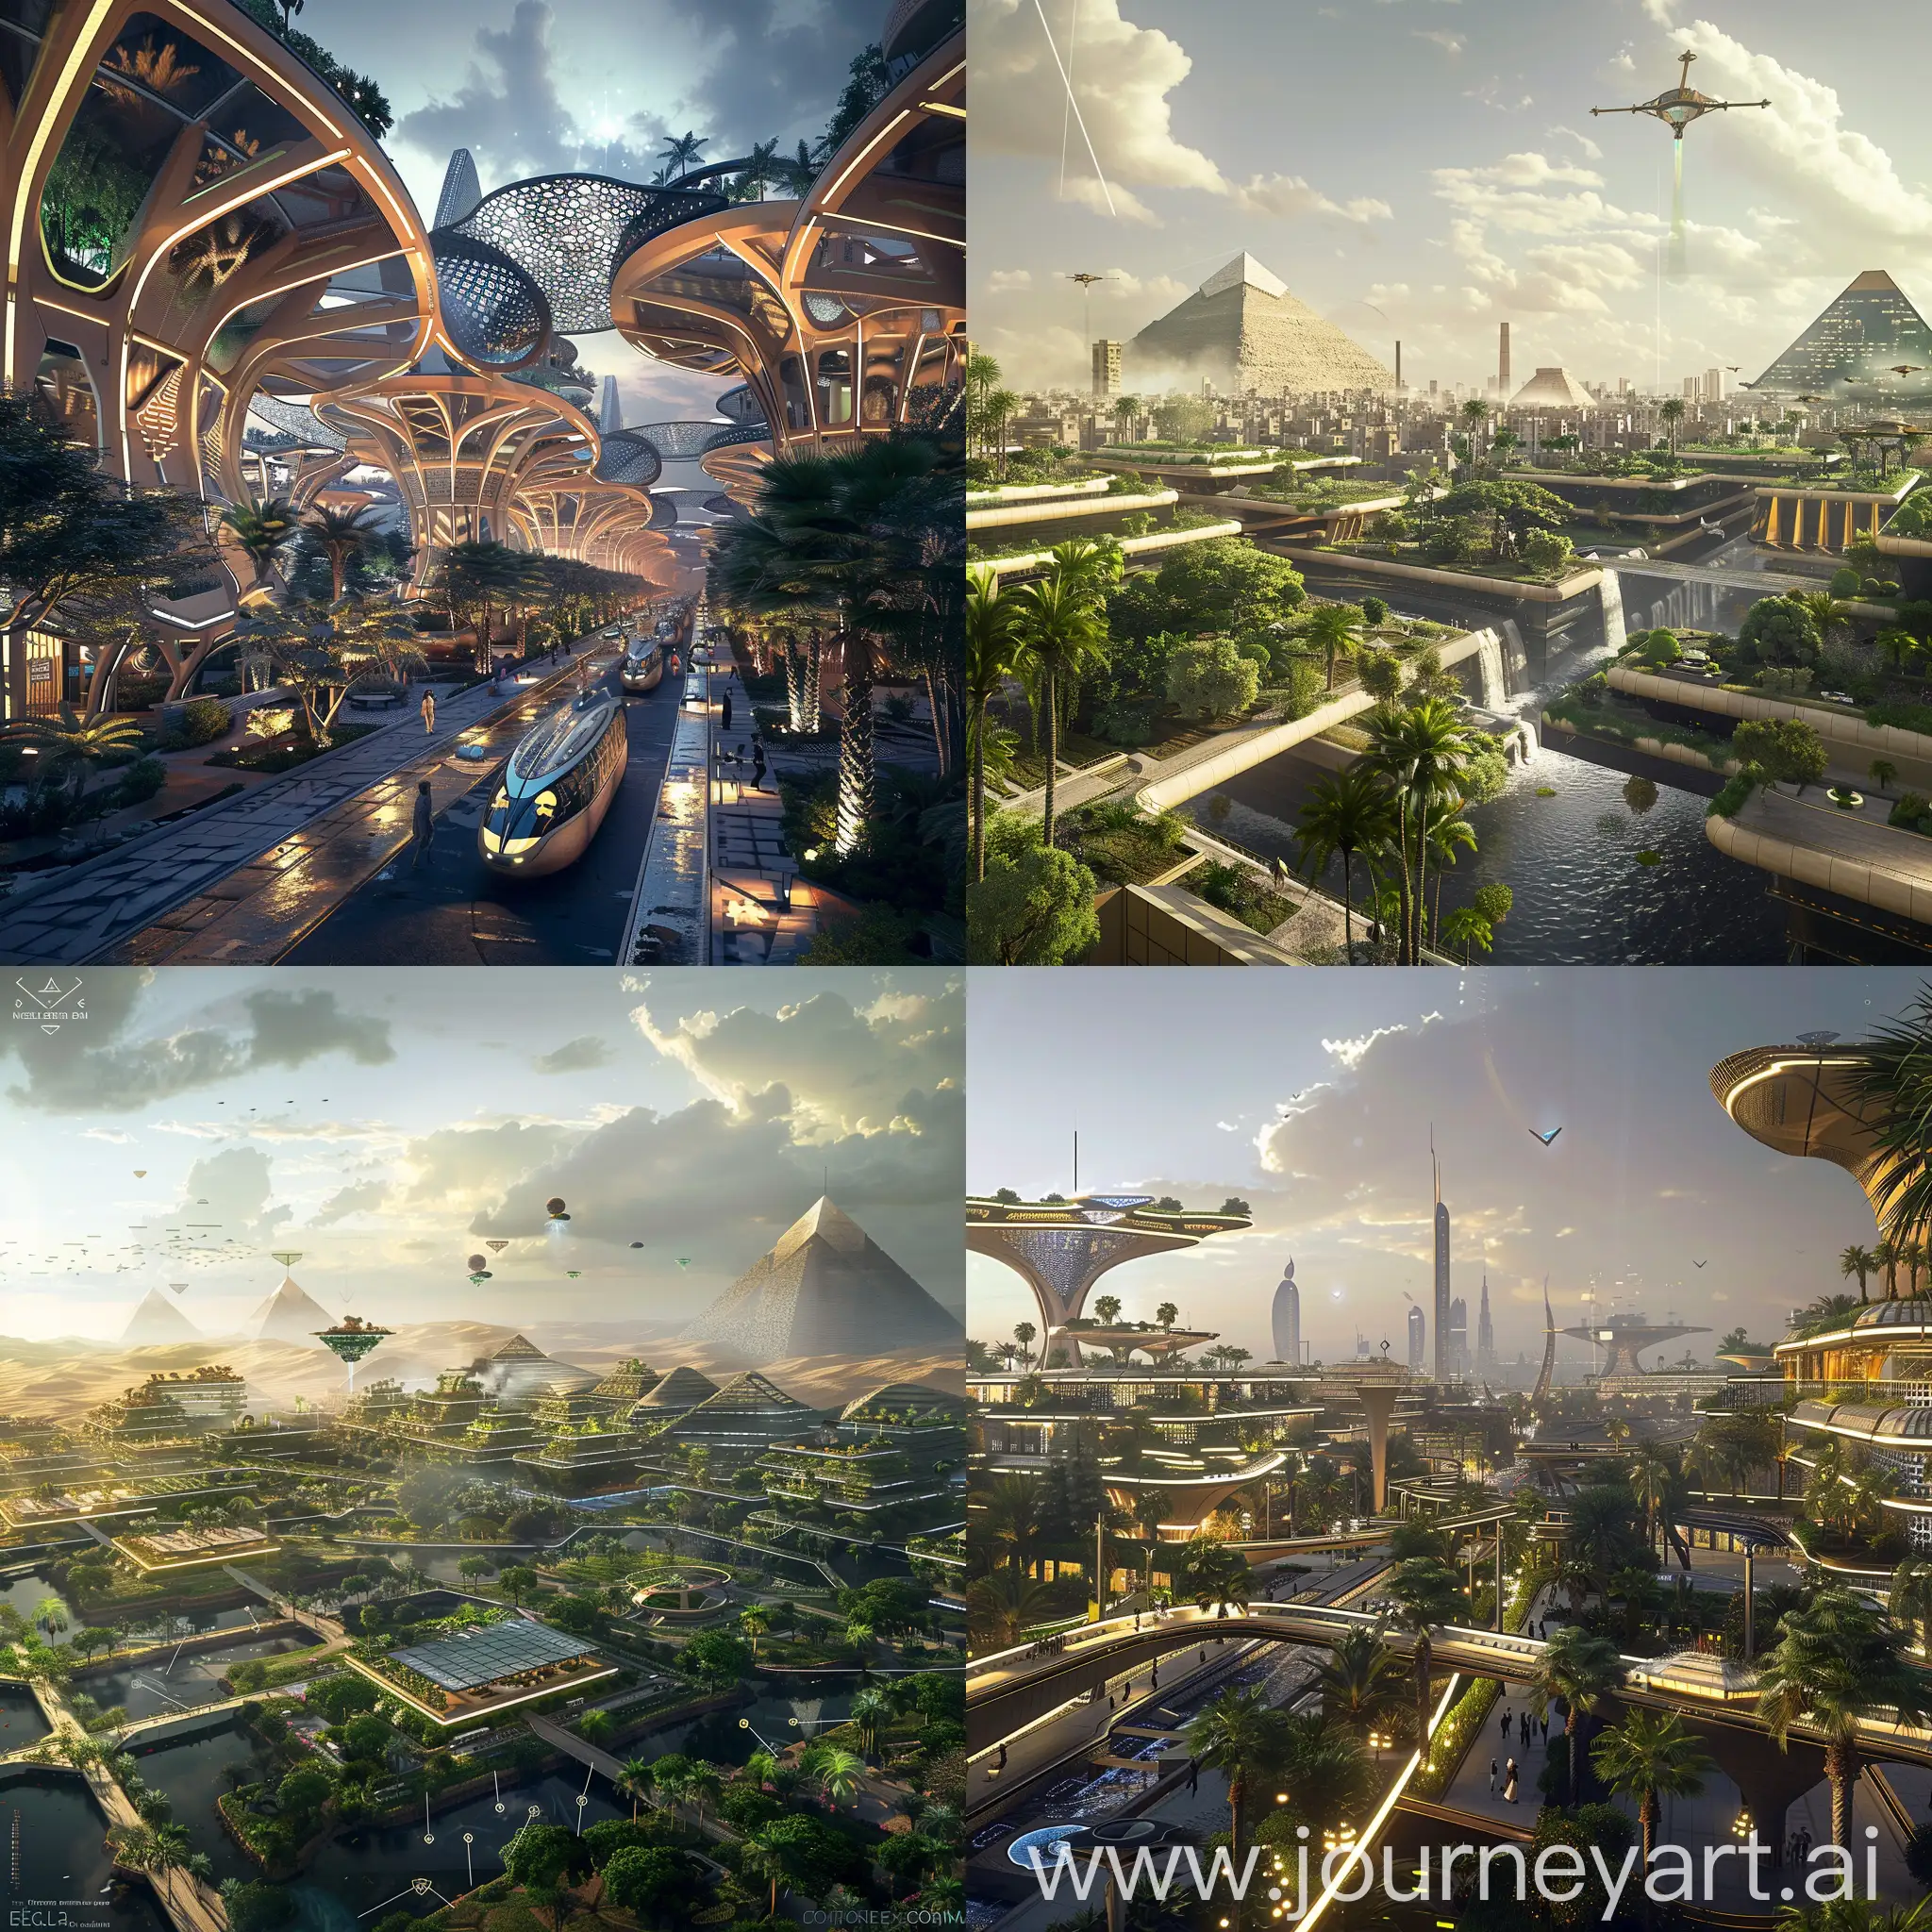 Futuristic-Cairo-Advanced-Science-and-Technology-in-Unreal-Engine-5-Style